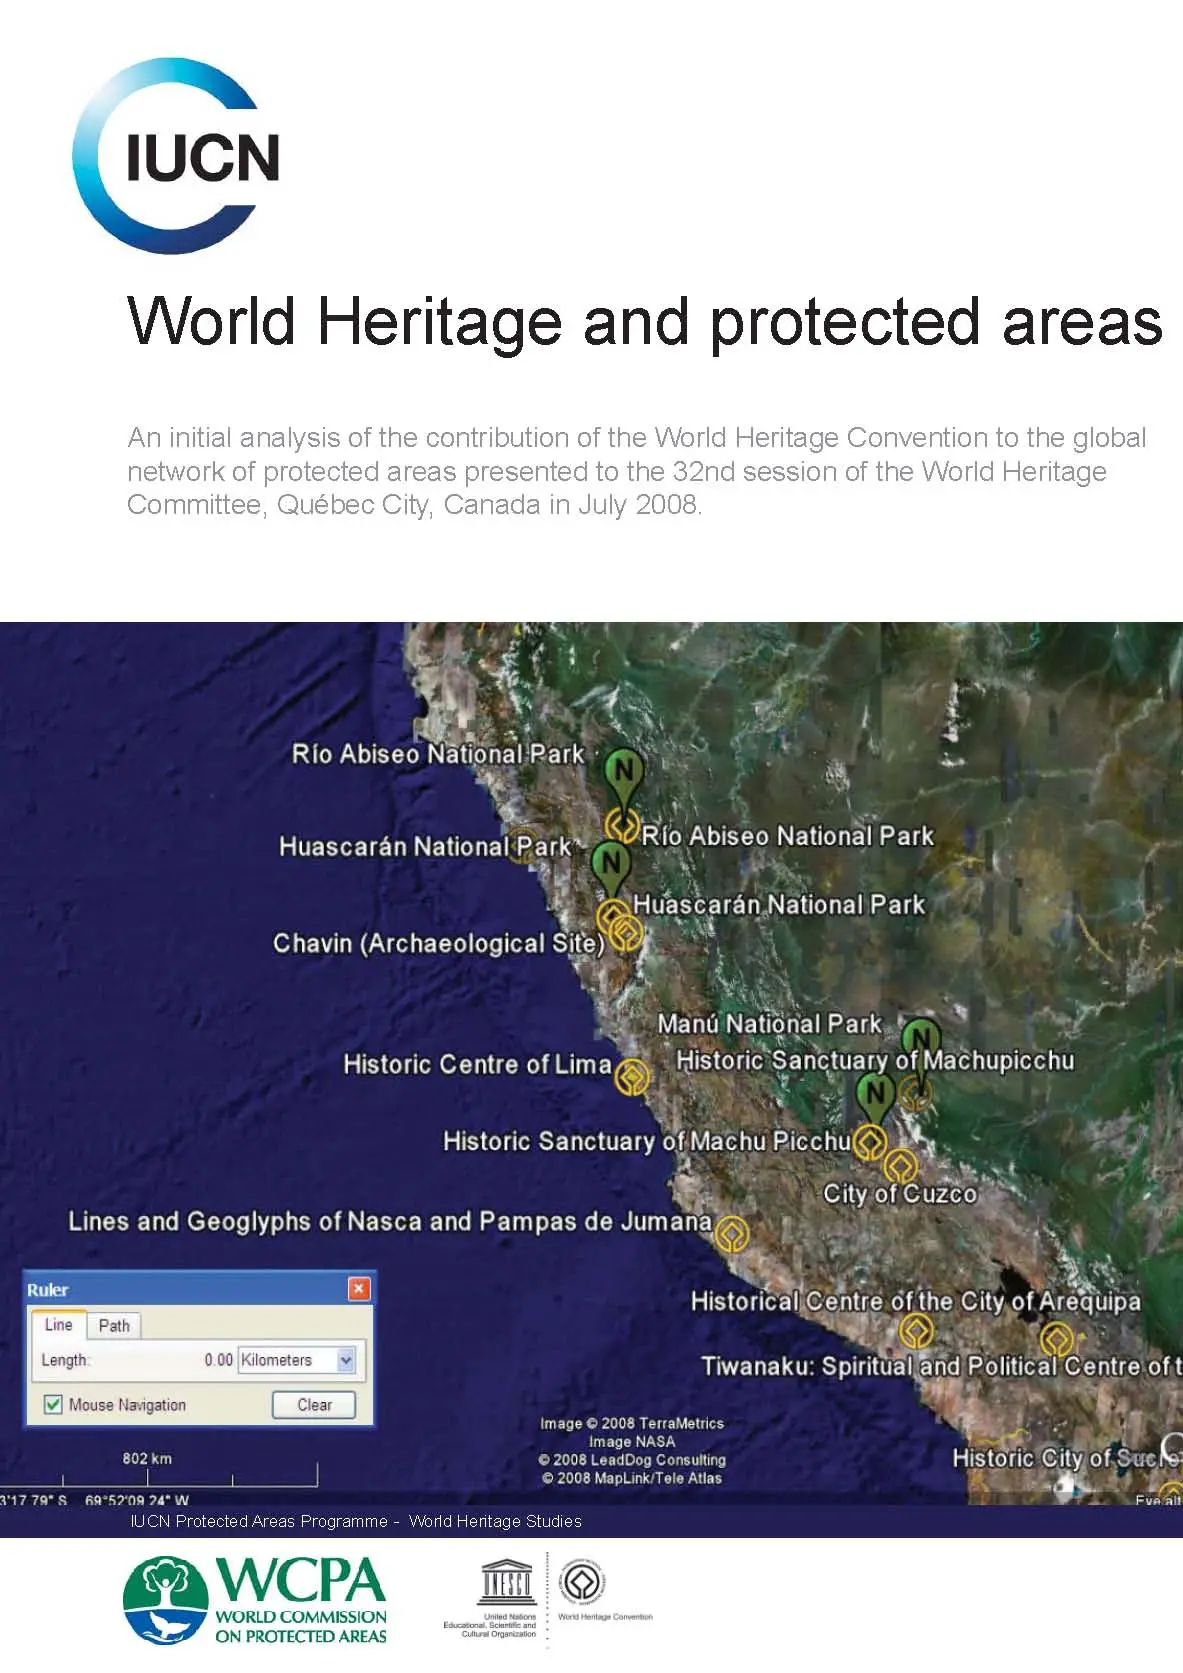 World Heritage and Protected Areas 2008